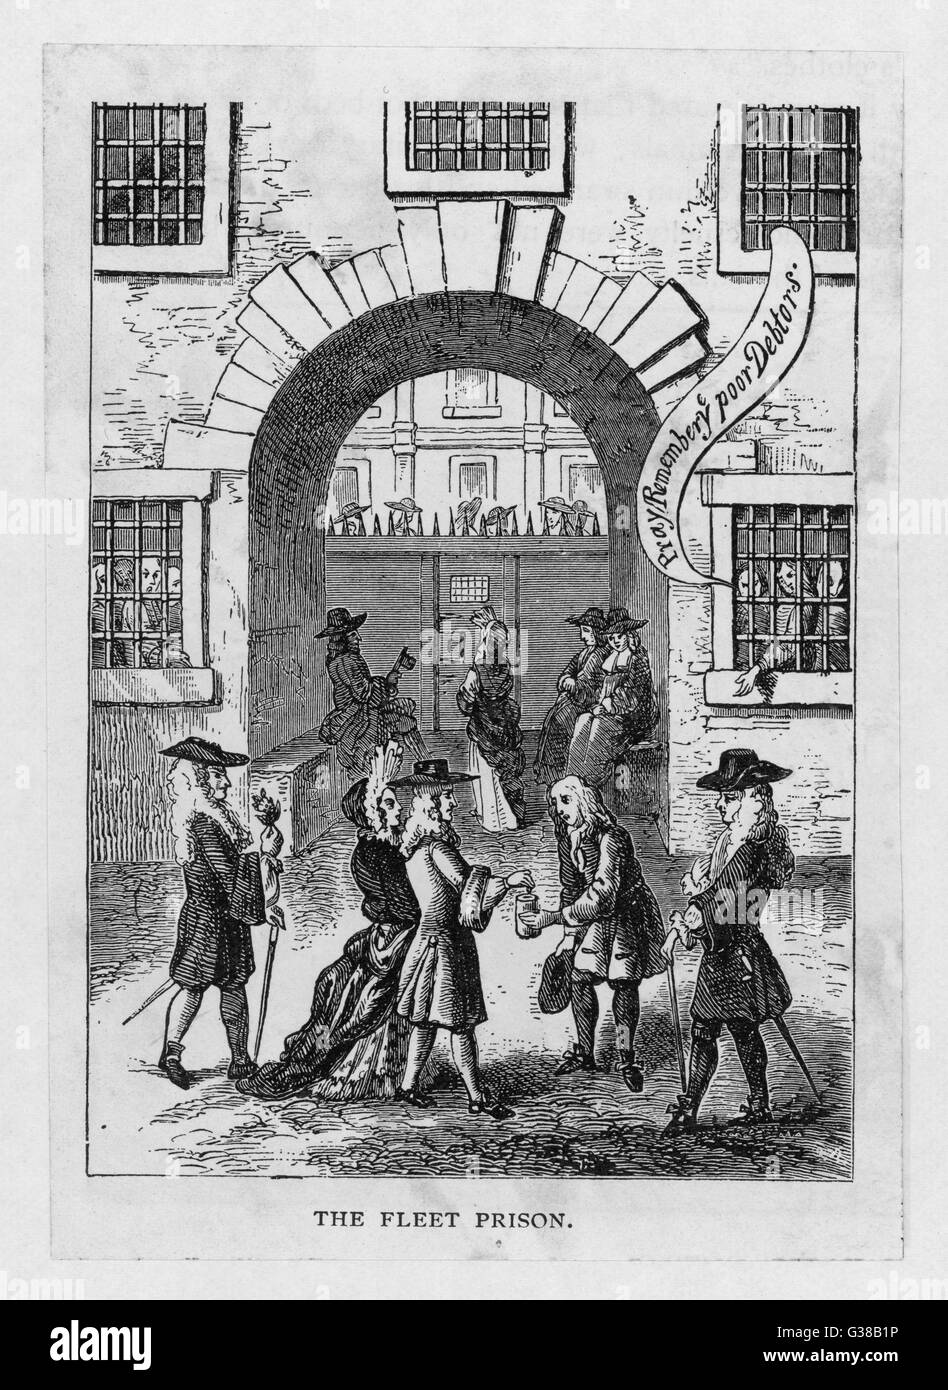 The exterior of Fleet prison  with debtor's grate        Date: Early 18th century Stock Photo